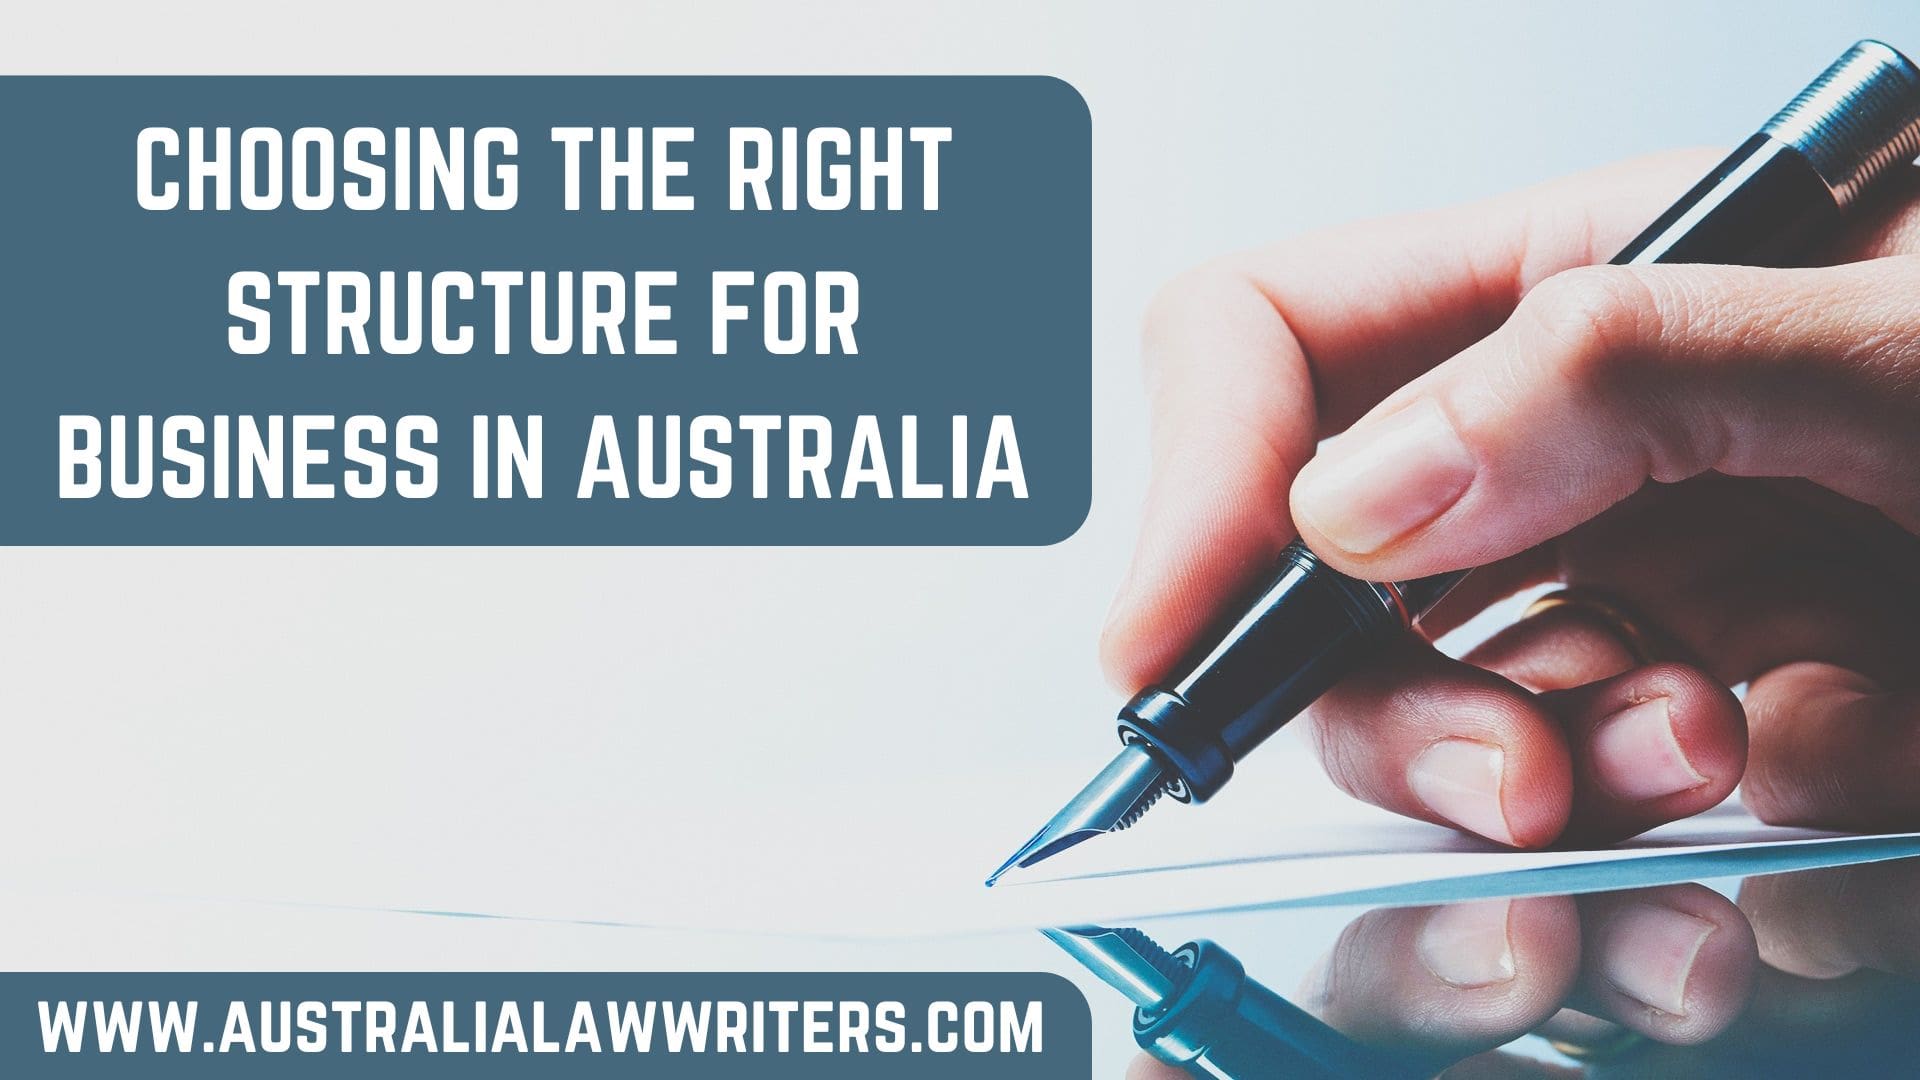 CHOOSING THE RIGHT STRUCTURE FOR BUSINESS IN AUSTRALIA